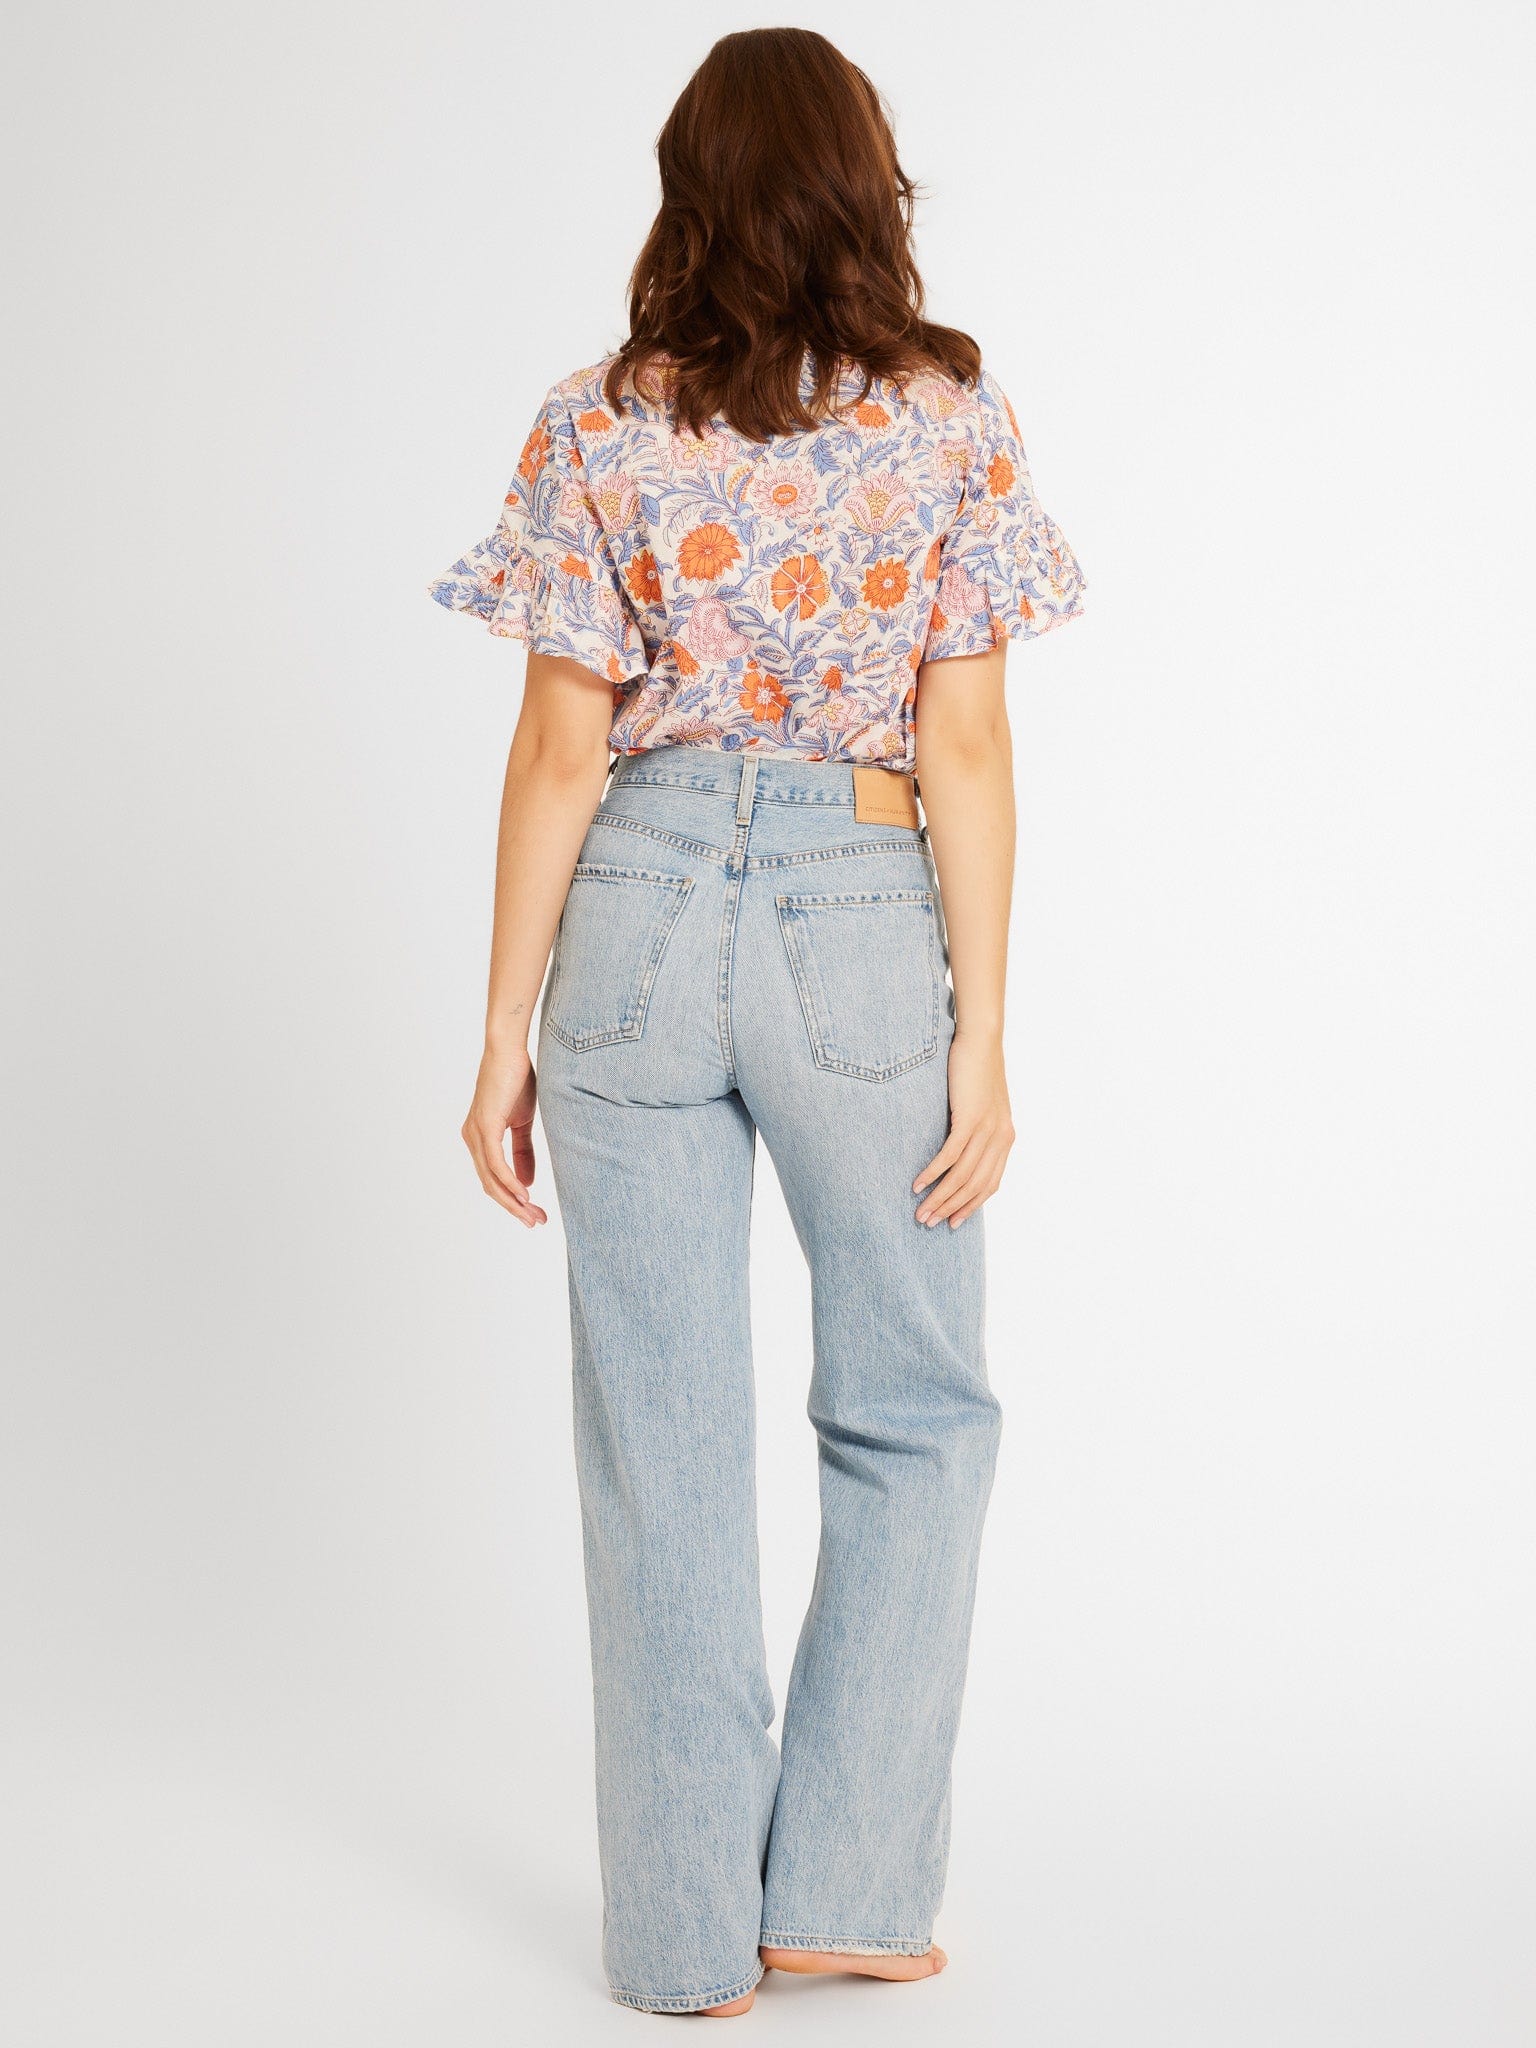 MILLE Clothing Vanessa Top in Newport Floral